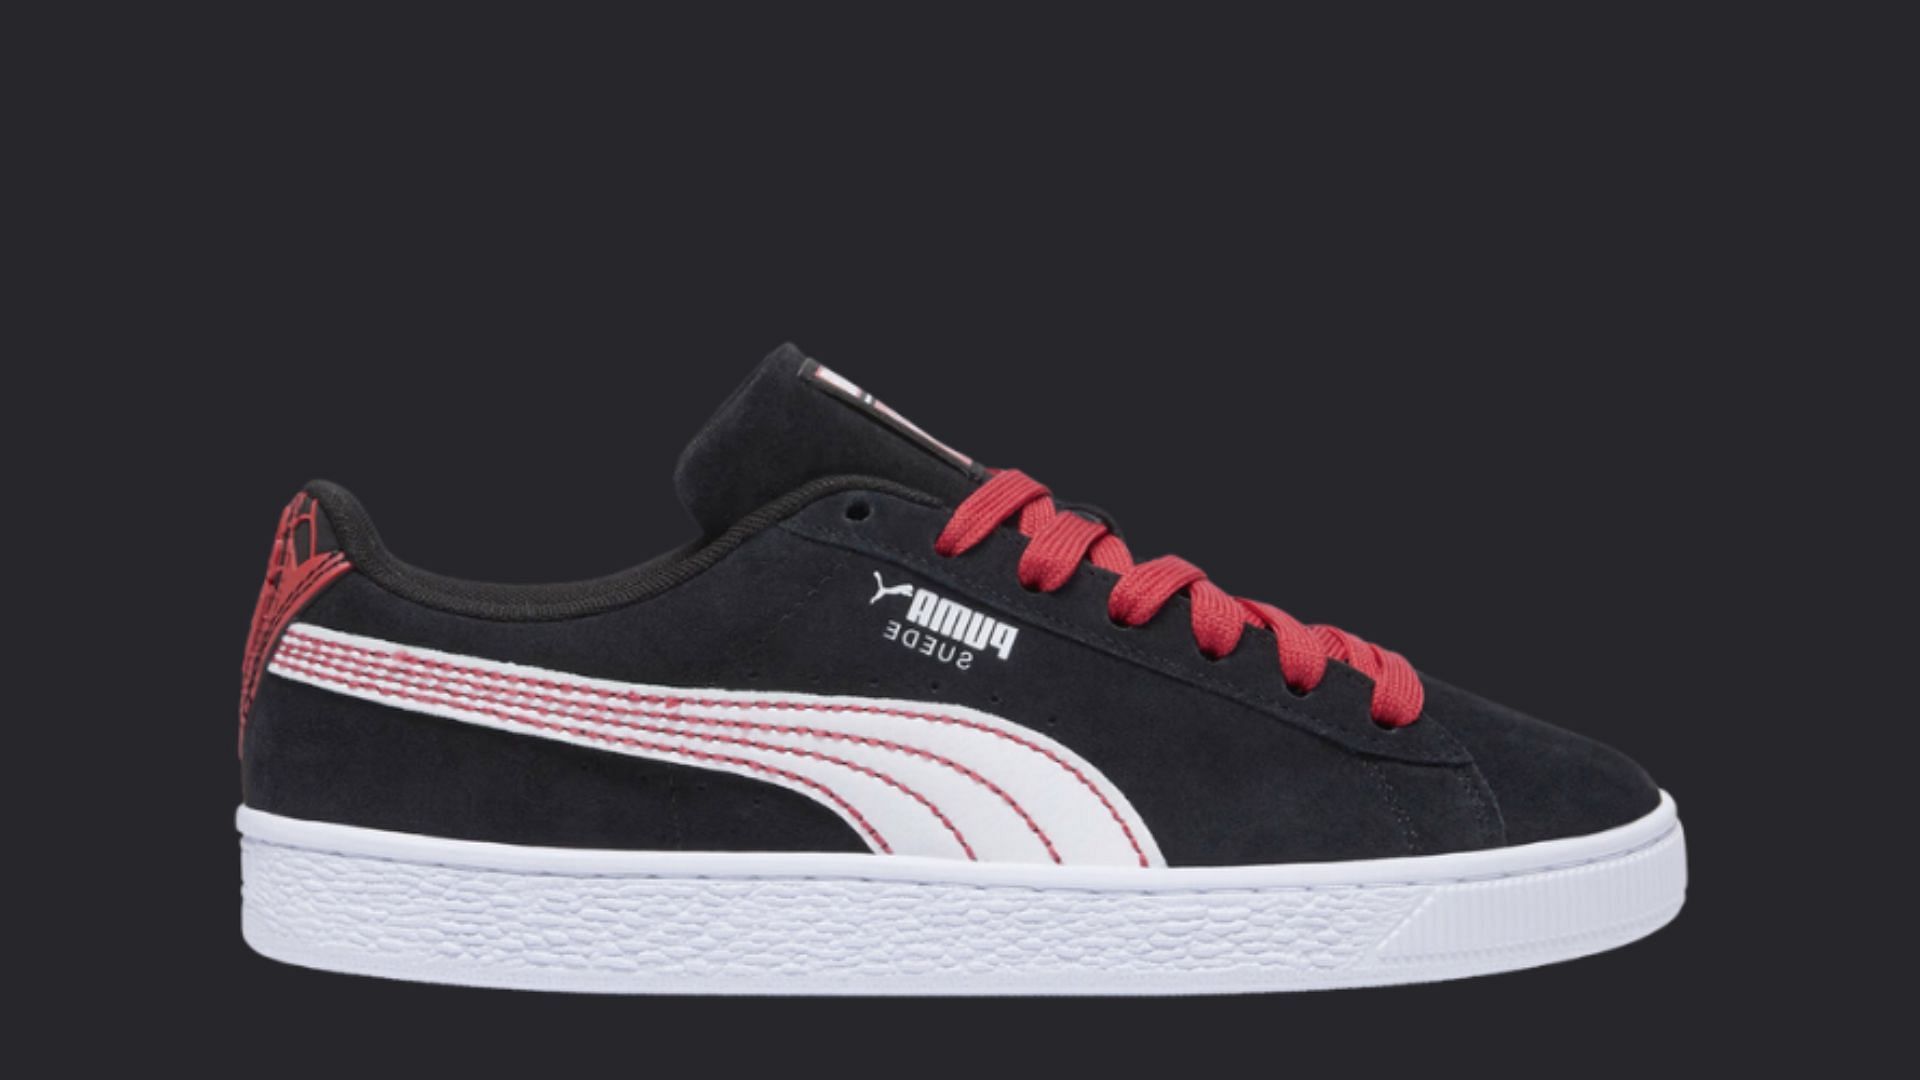 Marvel x PUMA Suede “Spider-Man” sneakers: Everything we know so far